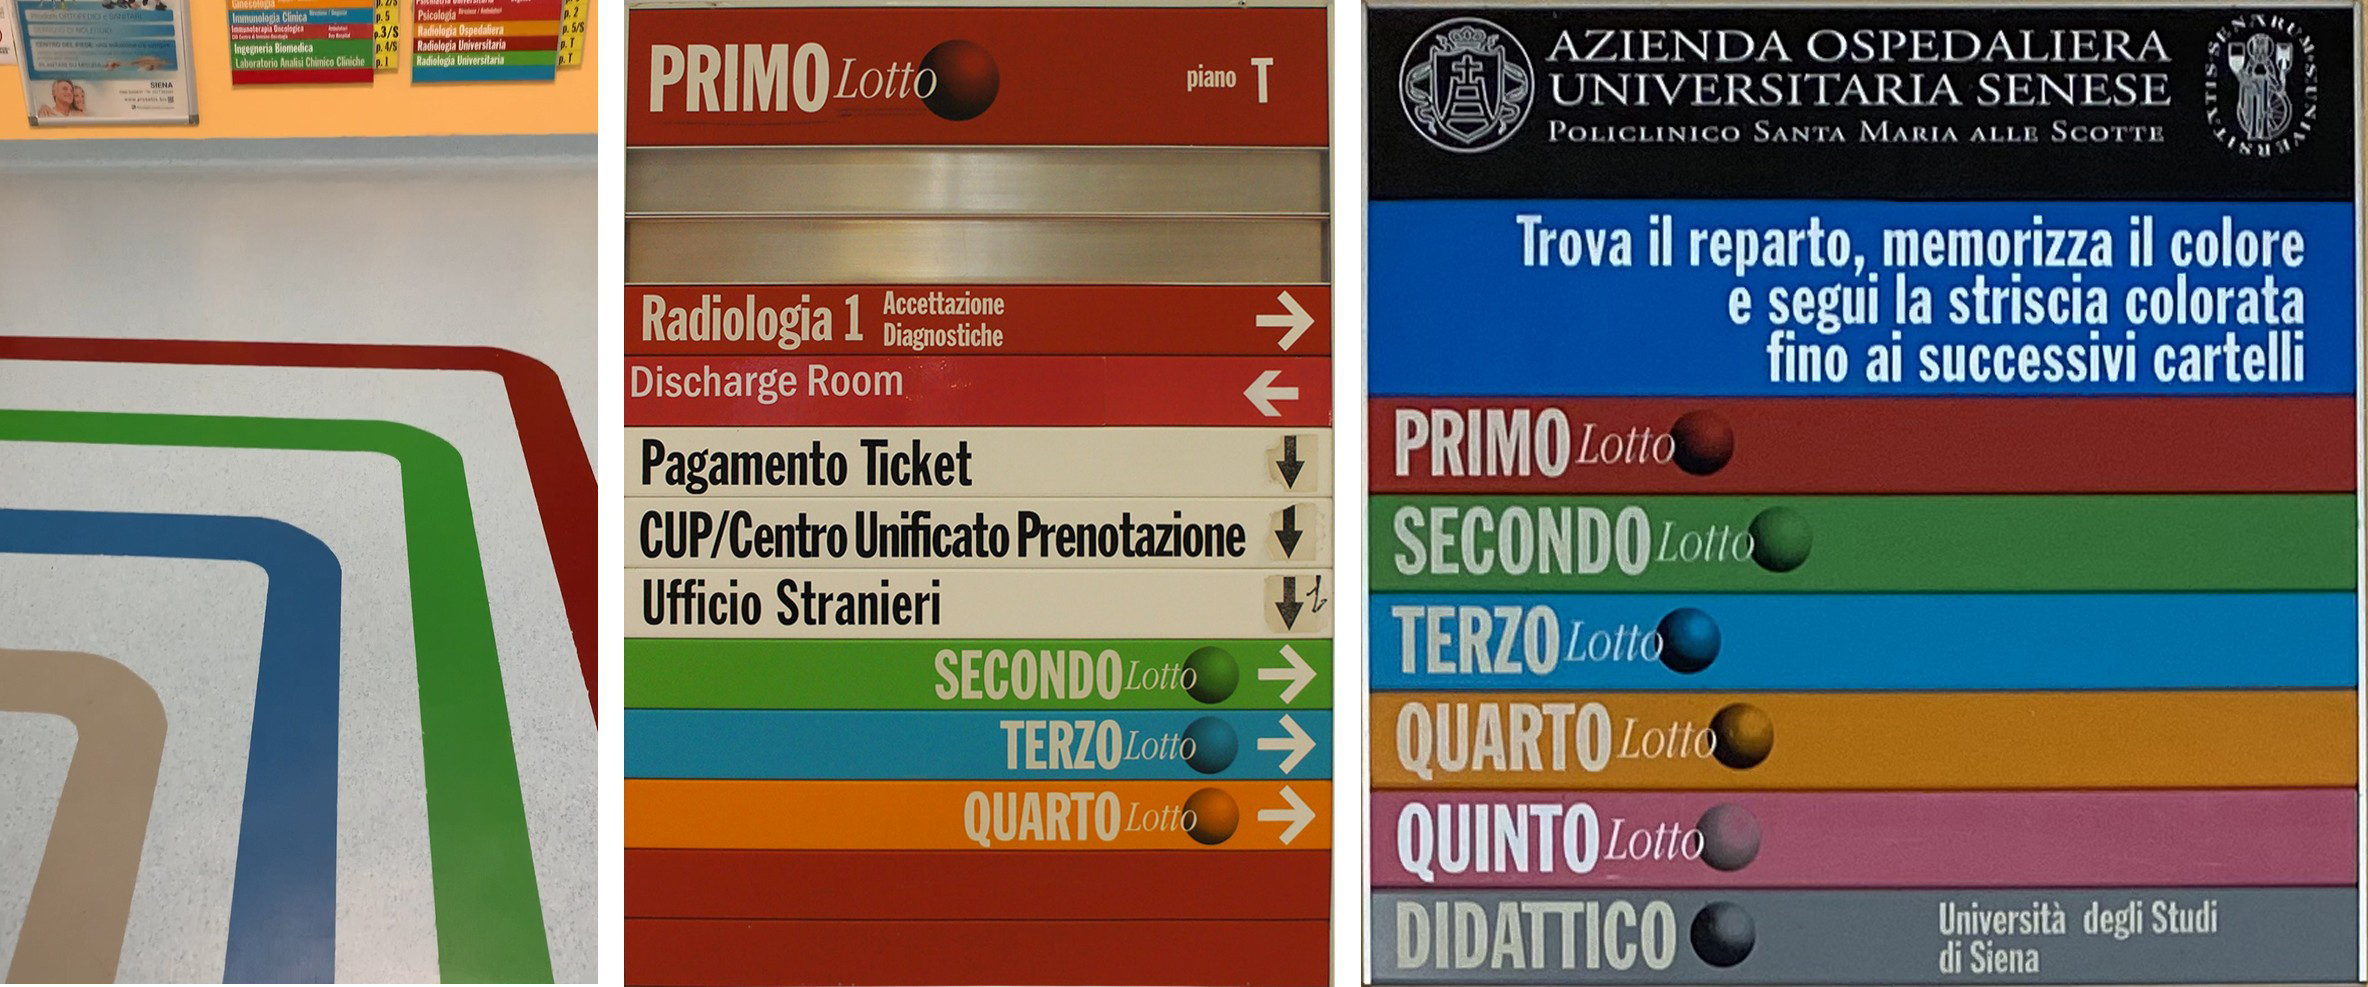 The hospital is provided with an elaborate signage system, making use of vertical and horizontal signs, consisting in coloured strips along the corridors, pointing the users to elevators and other points of interest.